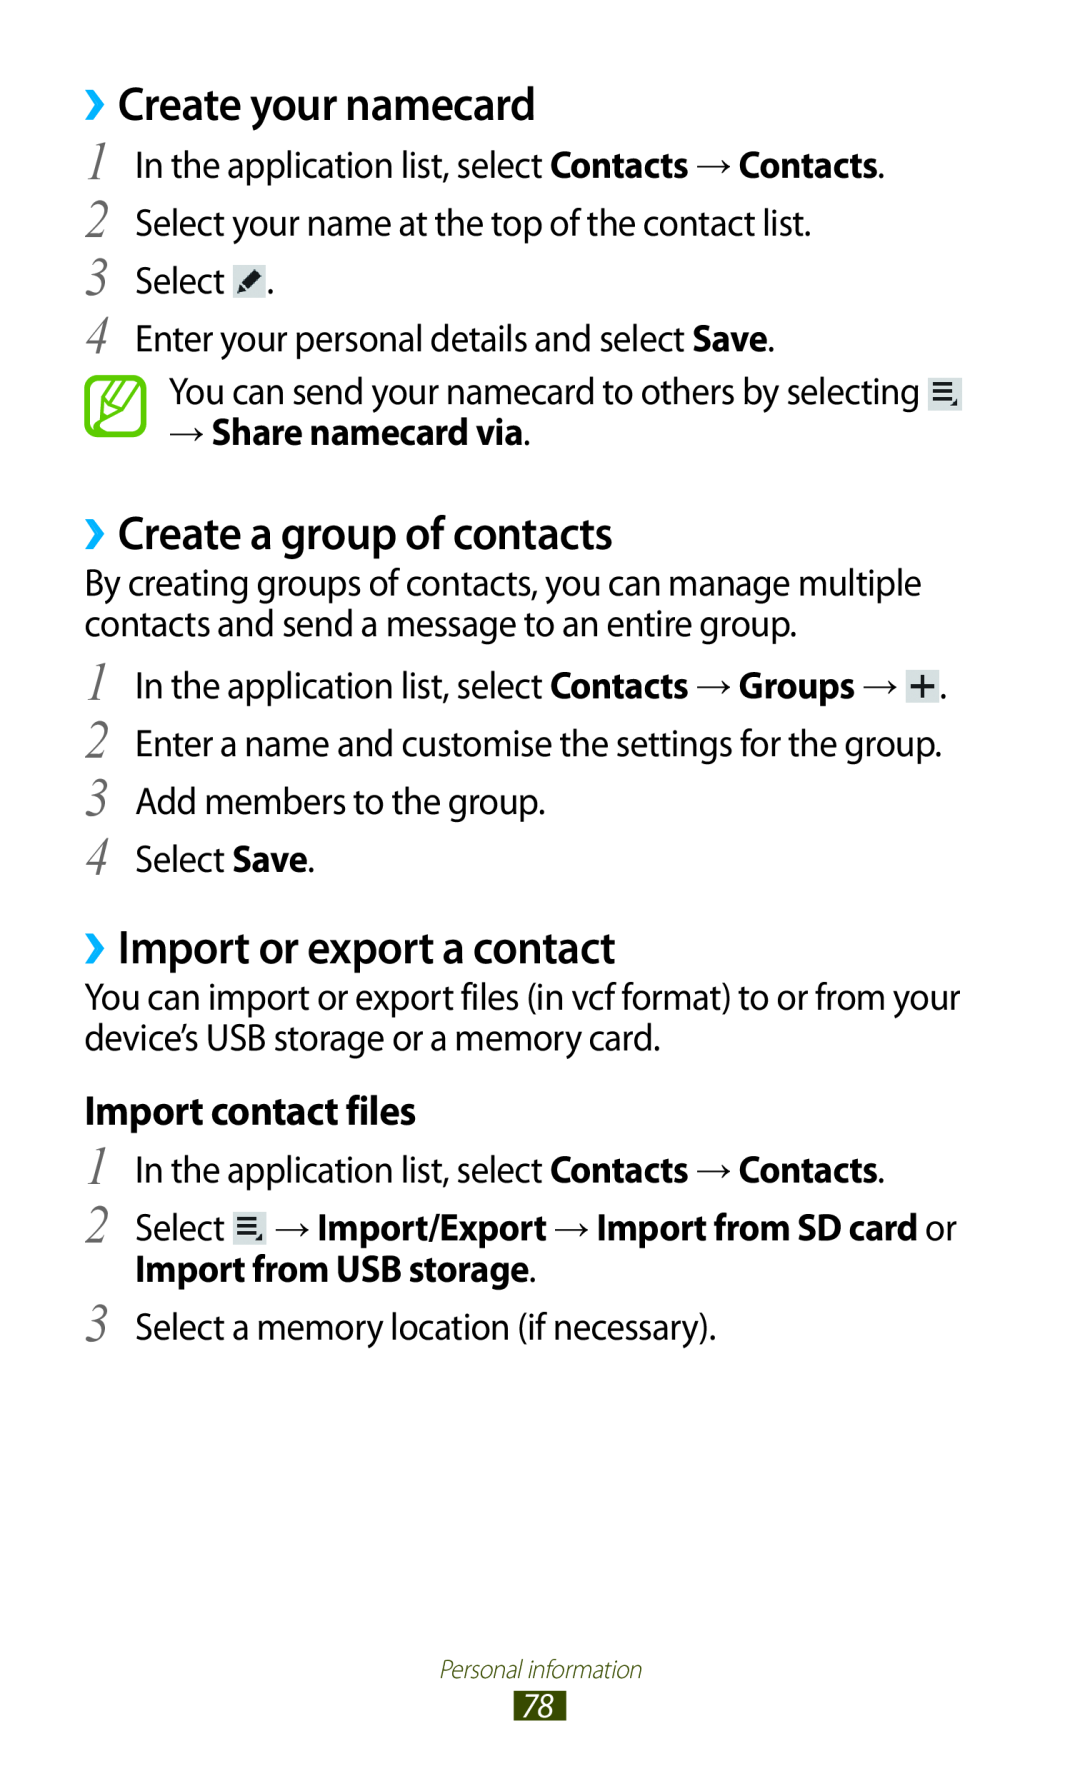 Samsung GTP5110ZWMTTT manual ››Create your namecard, ››Create a group of contacts, ››Import or export a contact 